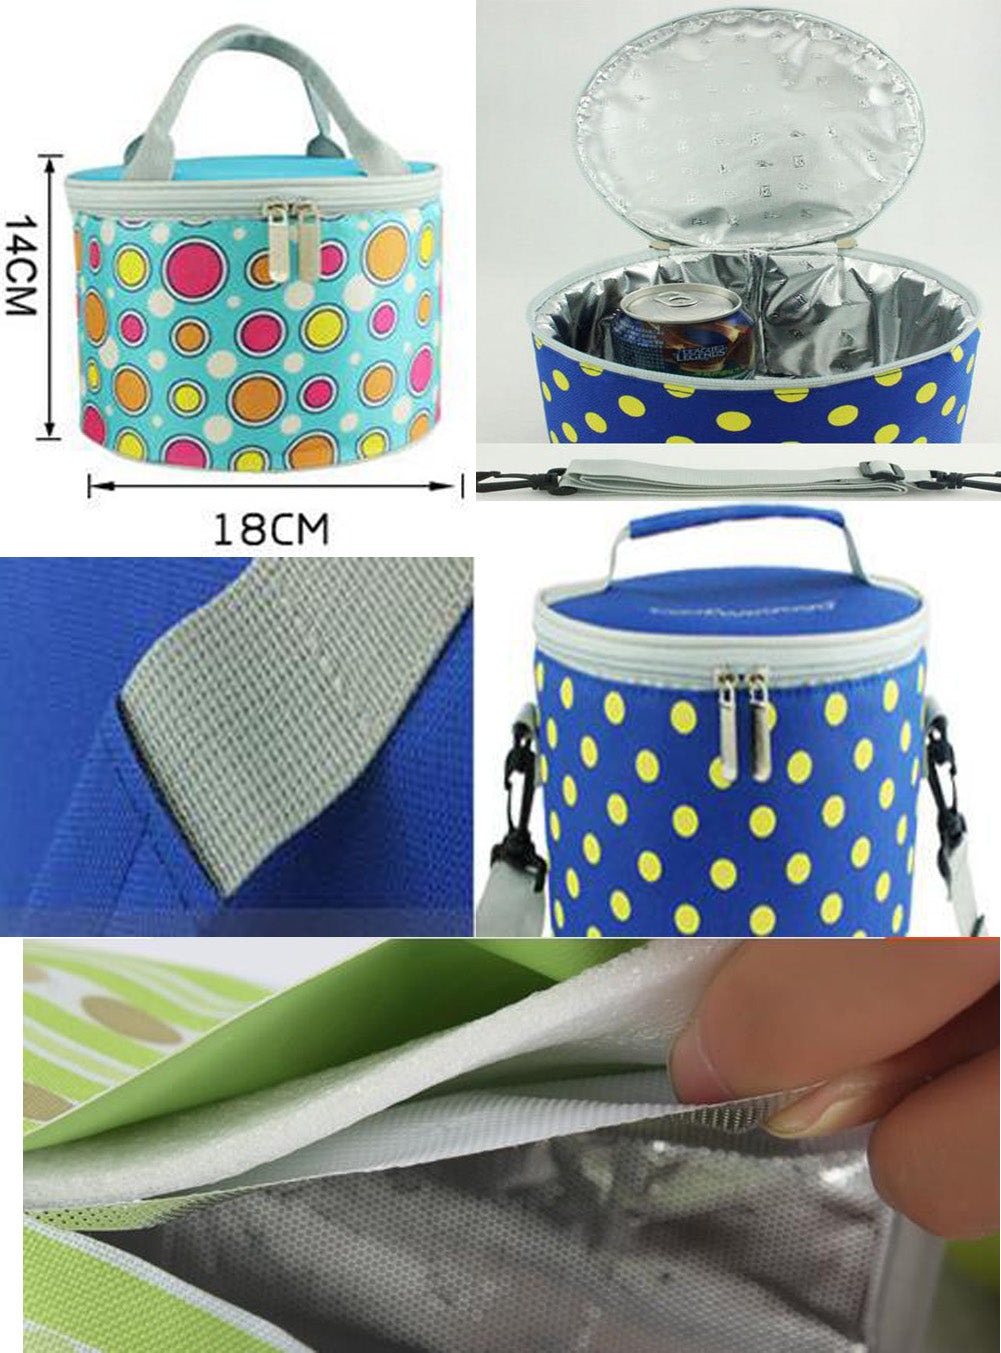 Round Durable Waterproof Lunch Bag Lunch Holder/Insulated Bag/Cooler Bag,#3